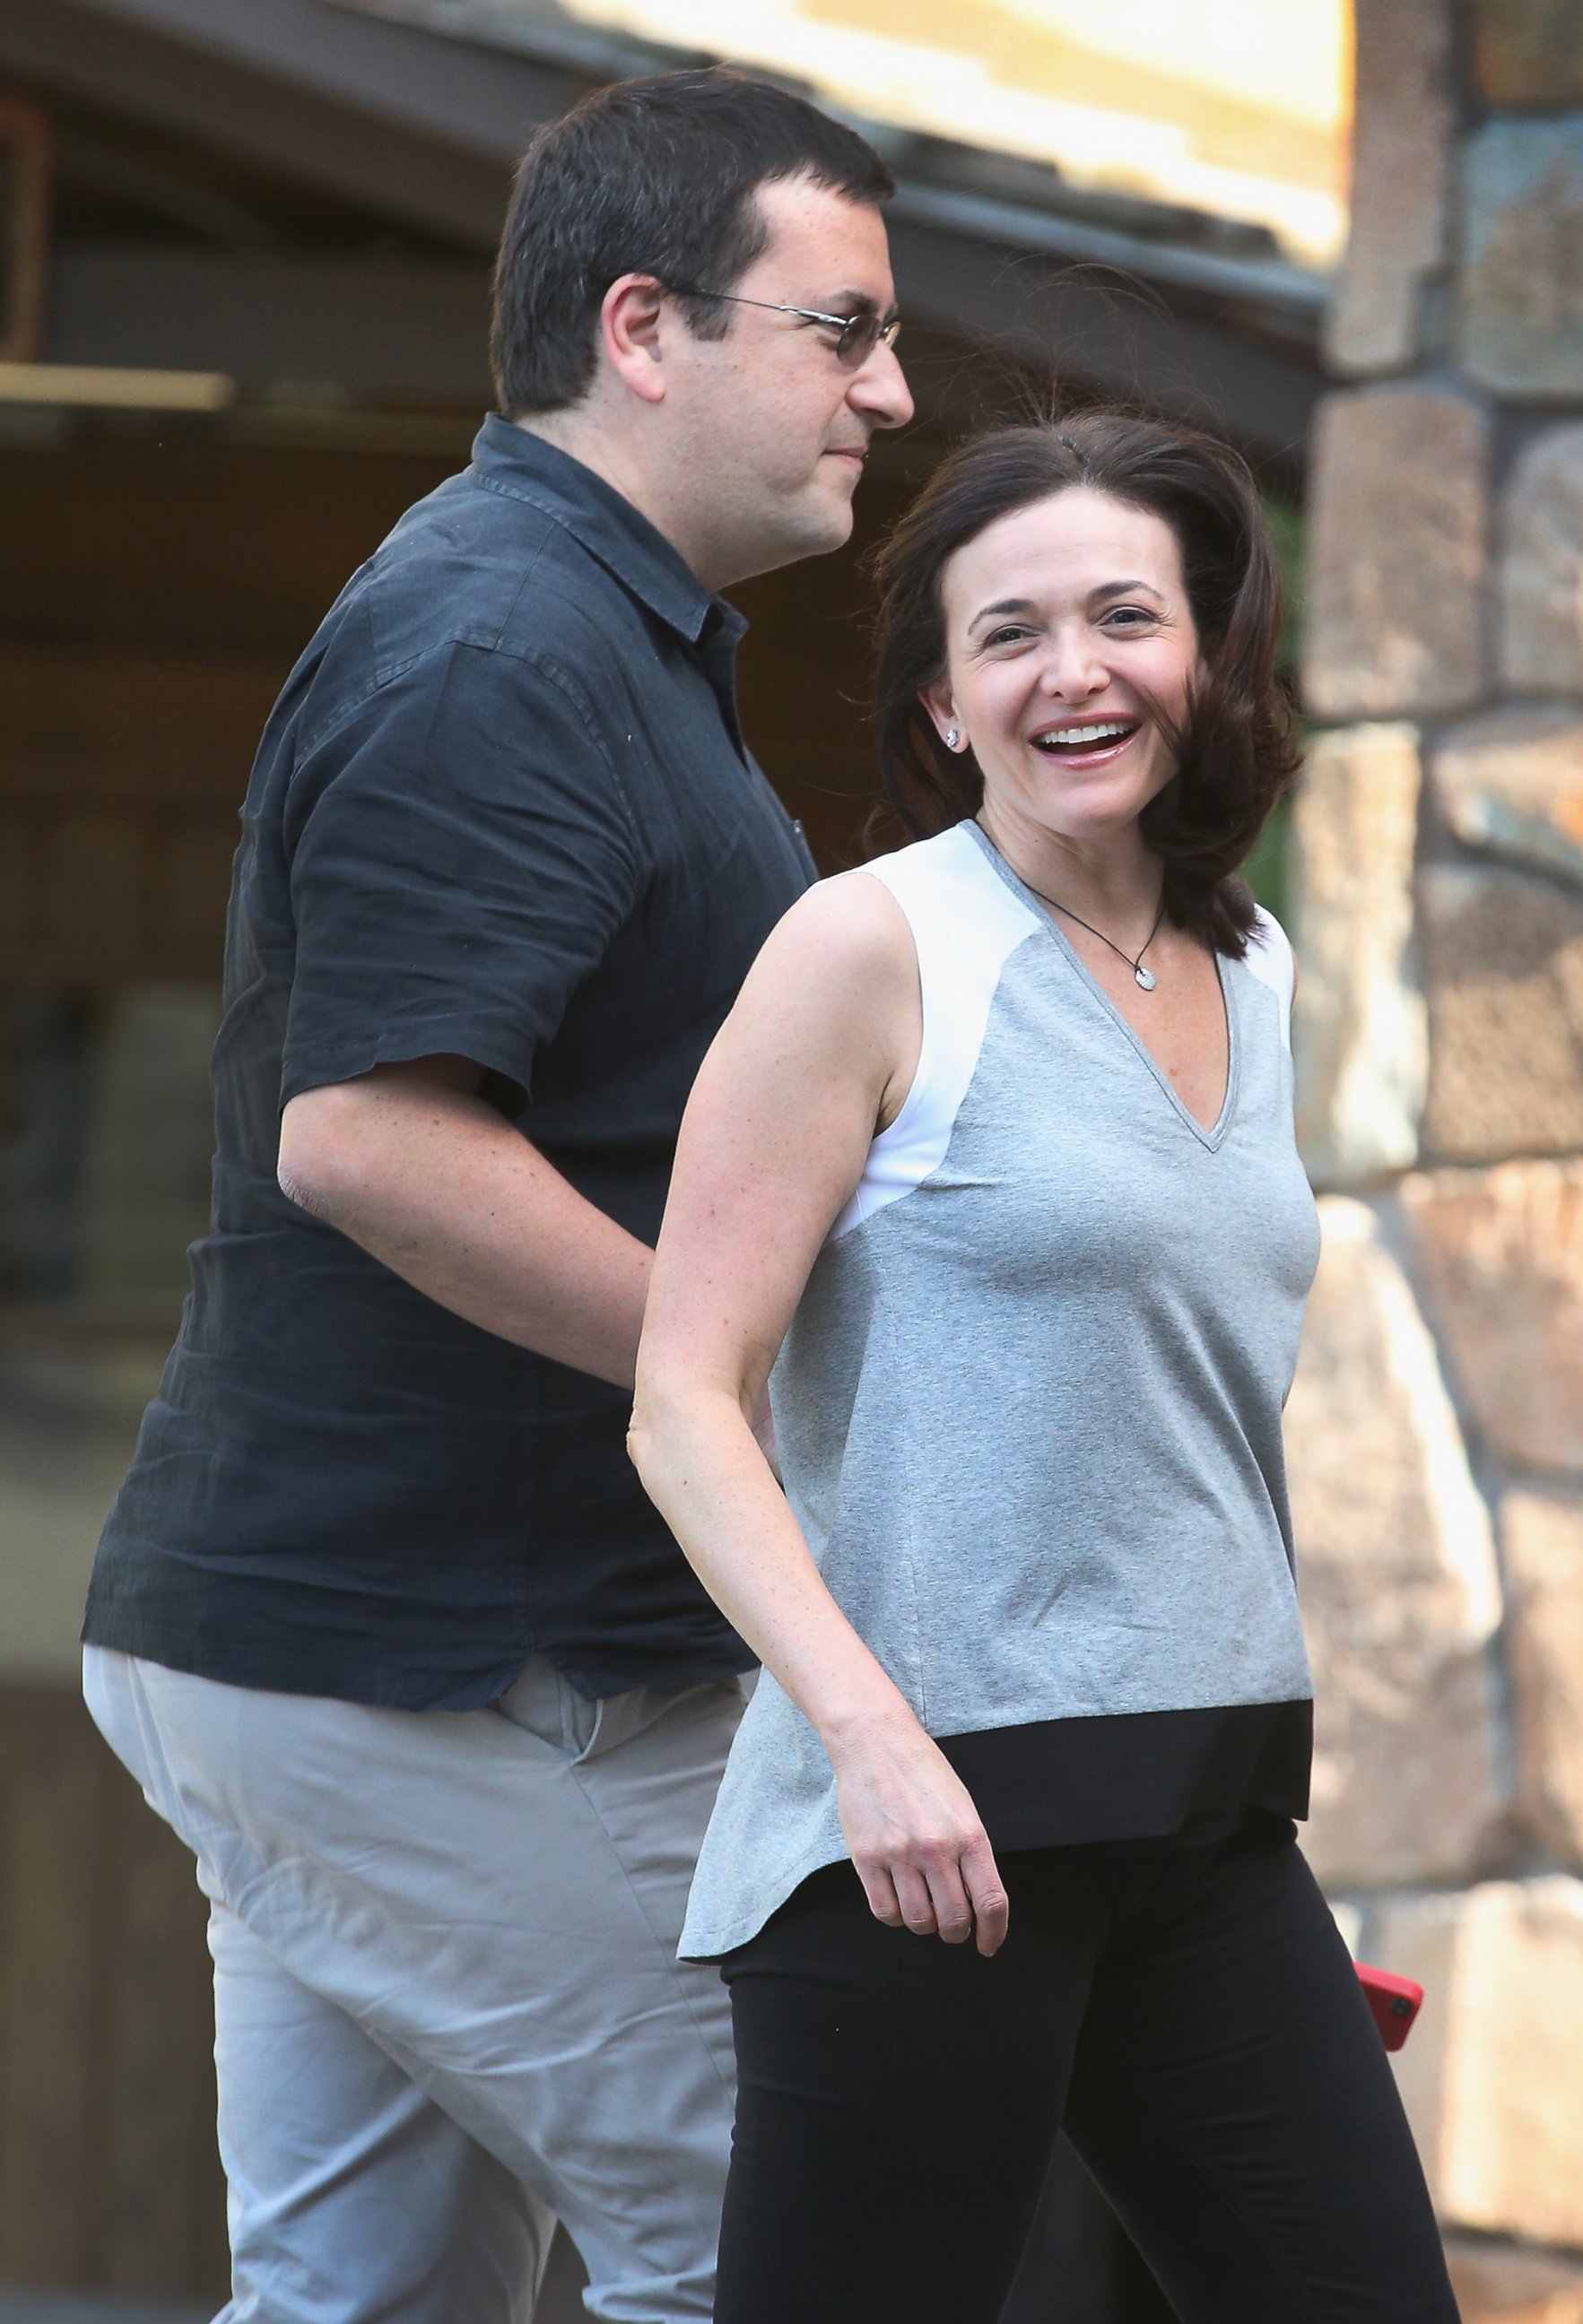 PHOTO: Sheryl Sandberg, Chief Operating Officer of Facebook, and her husband David Goldberg, CEO of SurveyMonkey, arrive for the Allen & Company Sun Valley Conference on July 8, 2014 in Sun Valley, Idaho.